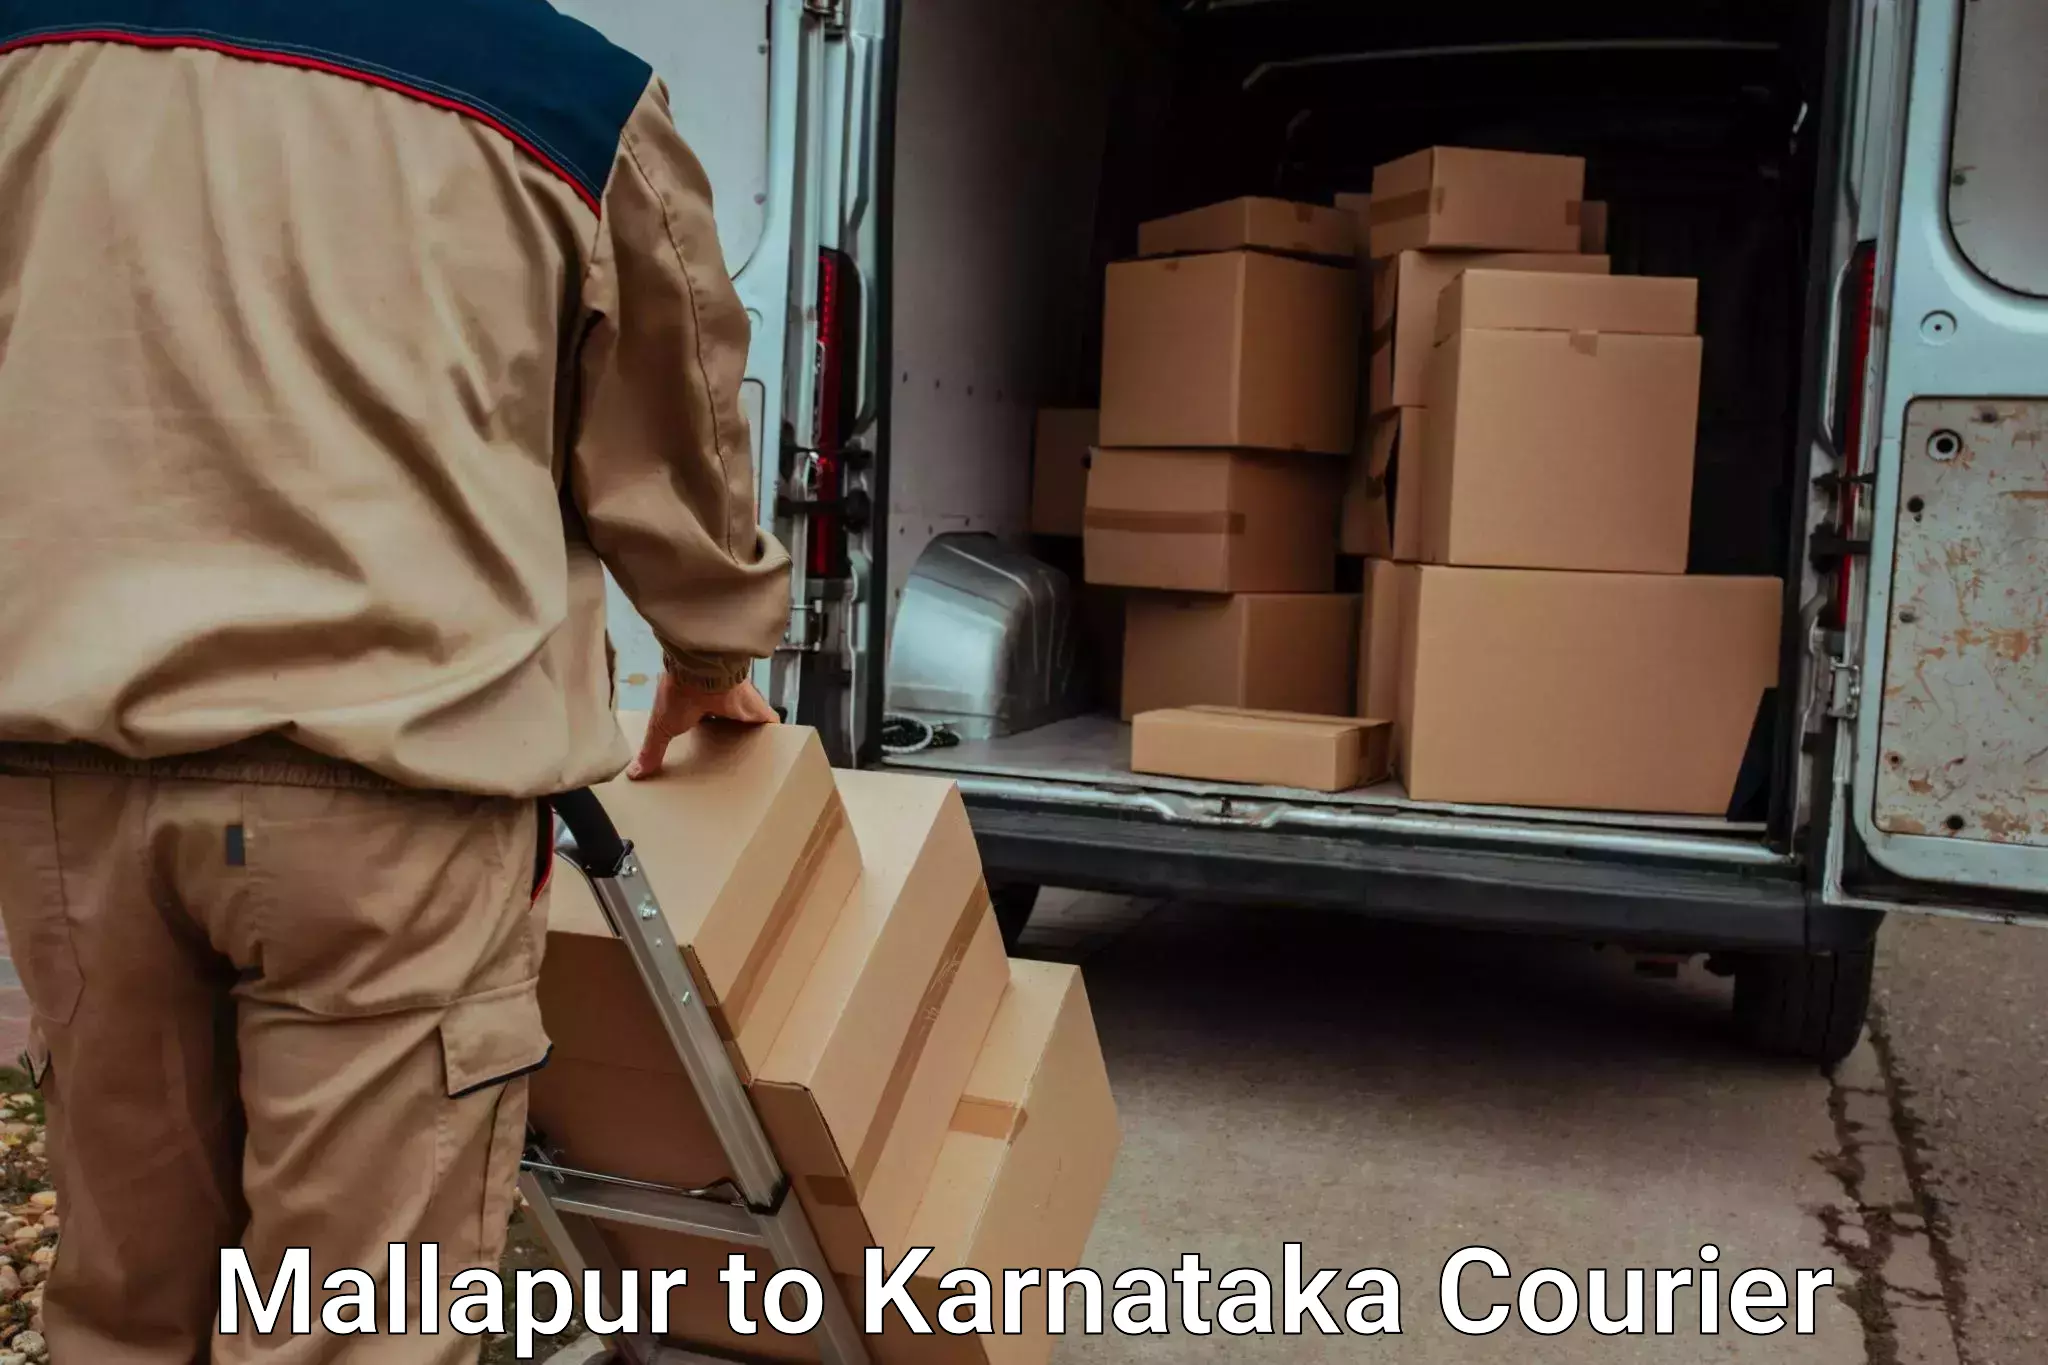 Luggage shipping guide Mallapur to Manipal Academy of Higher Education